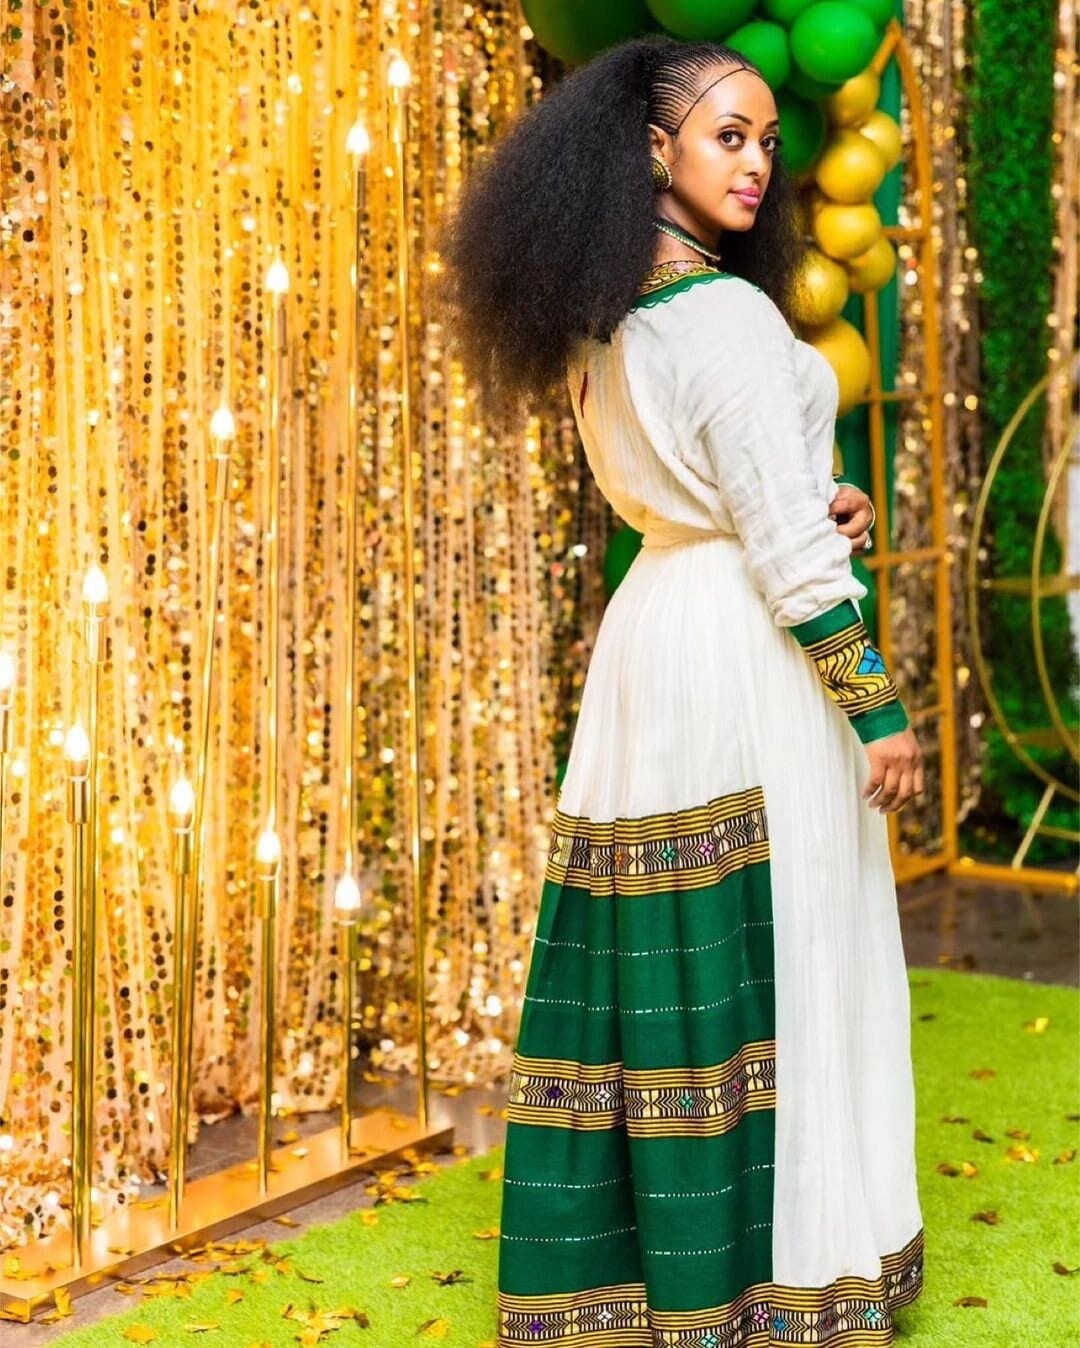 Lush Elegance: Handwoven Green Habesha Dress - Traditional Beauty with Exquisite Embroidery!